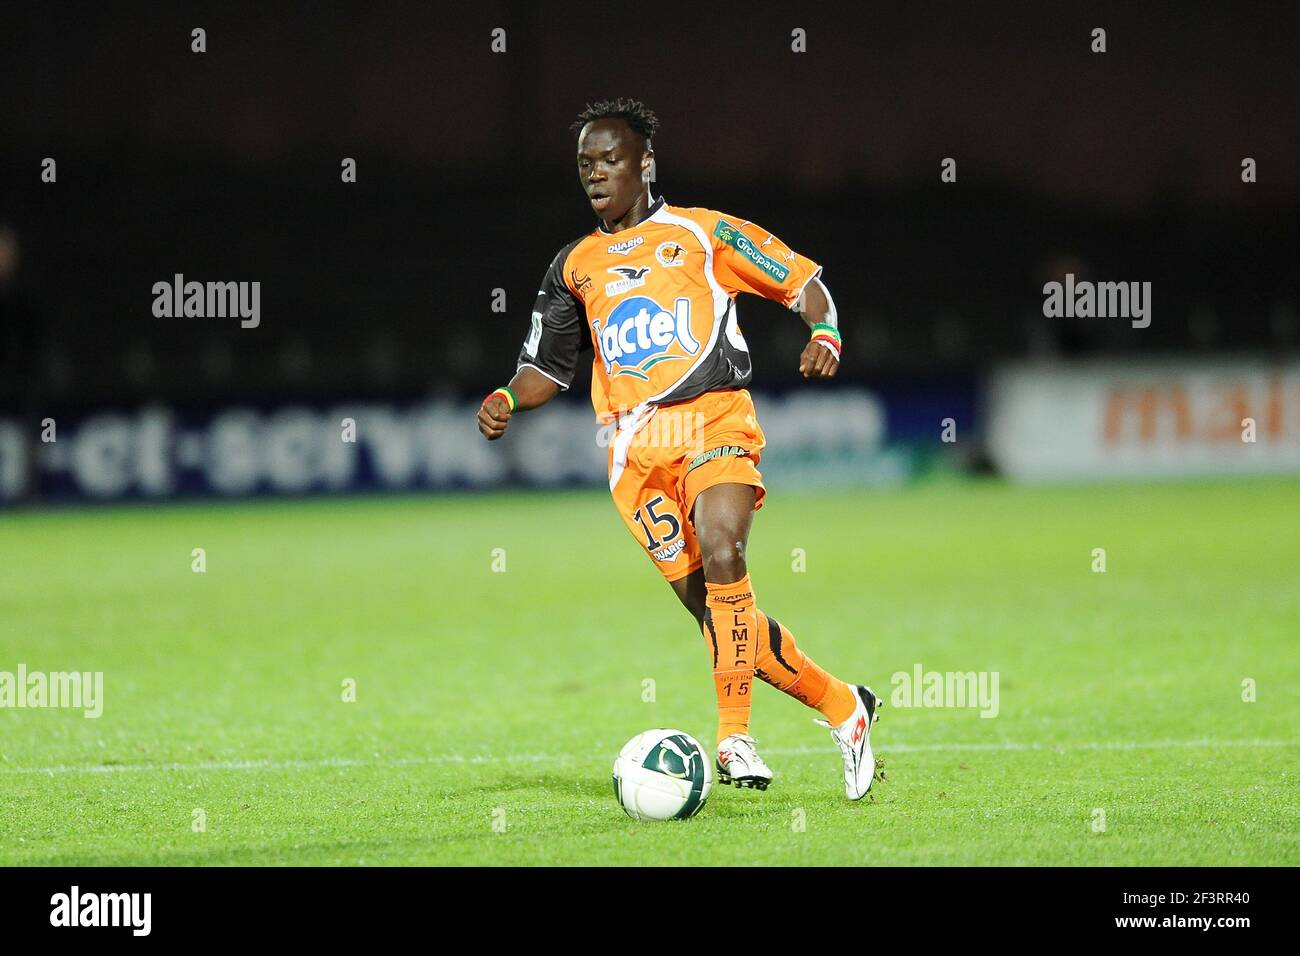 FOOTBALL - FRENCH CHAMPIONSHIP 2010/2011 - L2 - STADE LAVALLOIS v EVIAN TG - 09/05/2011 - PHOTO PASCAL ALLEE / DPPI - FREDERIC MENDY (LAV) Stock Photo